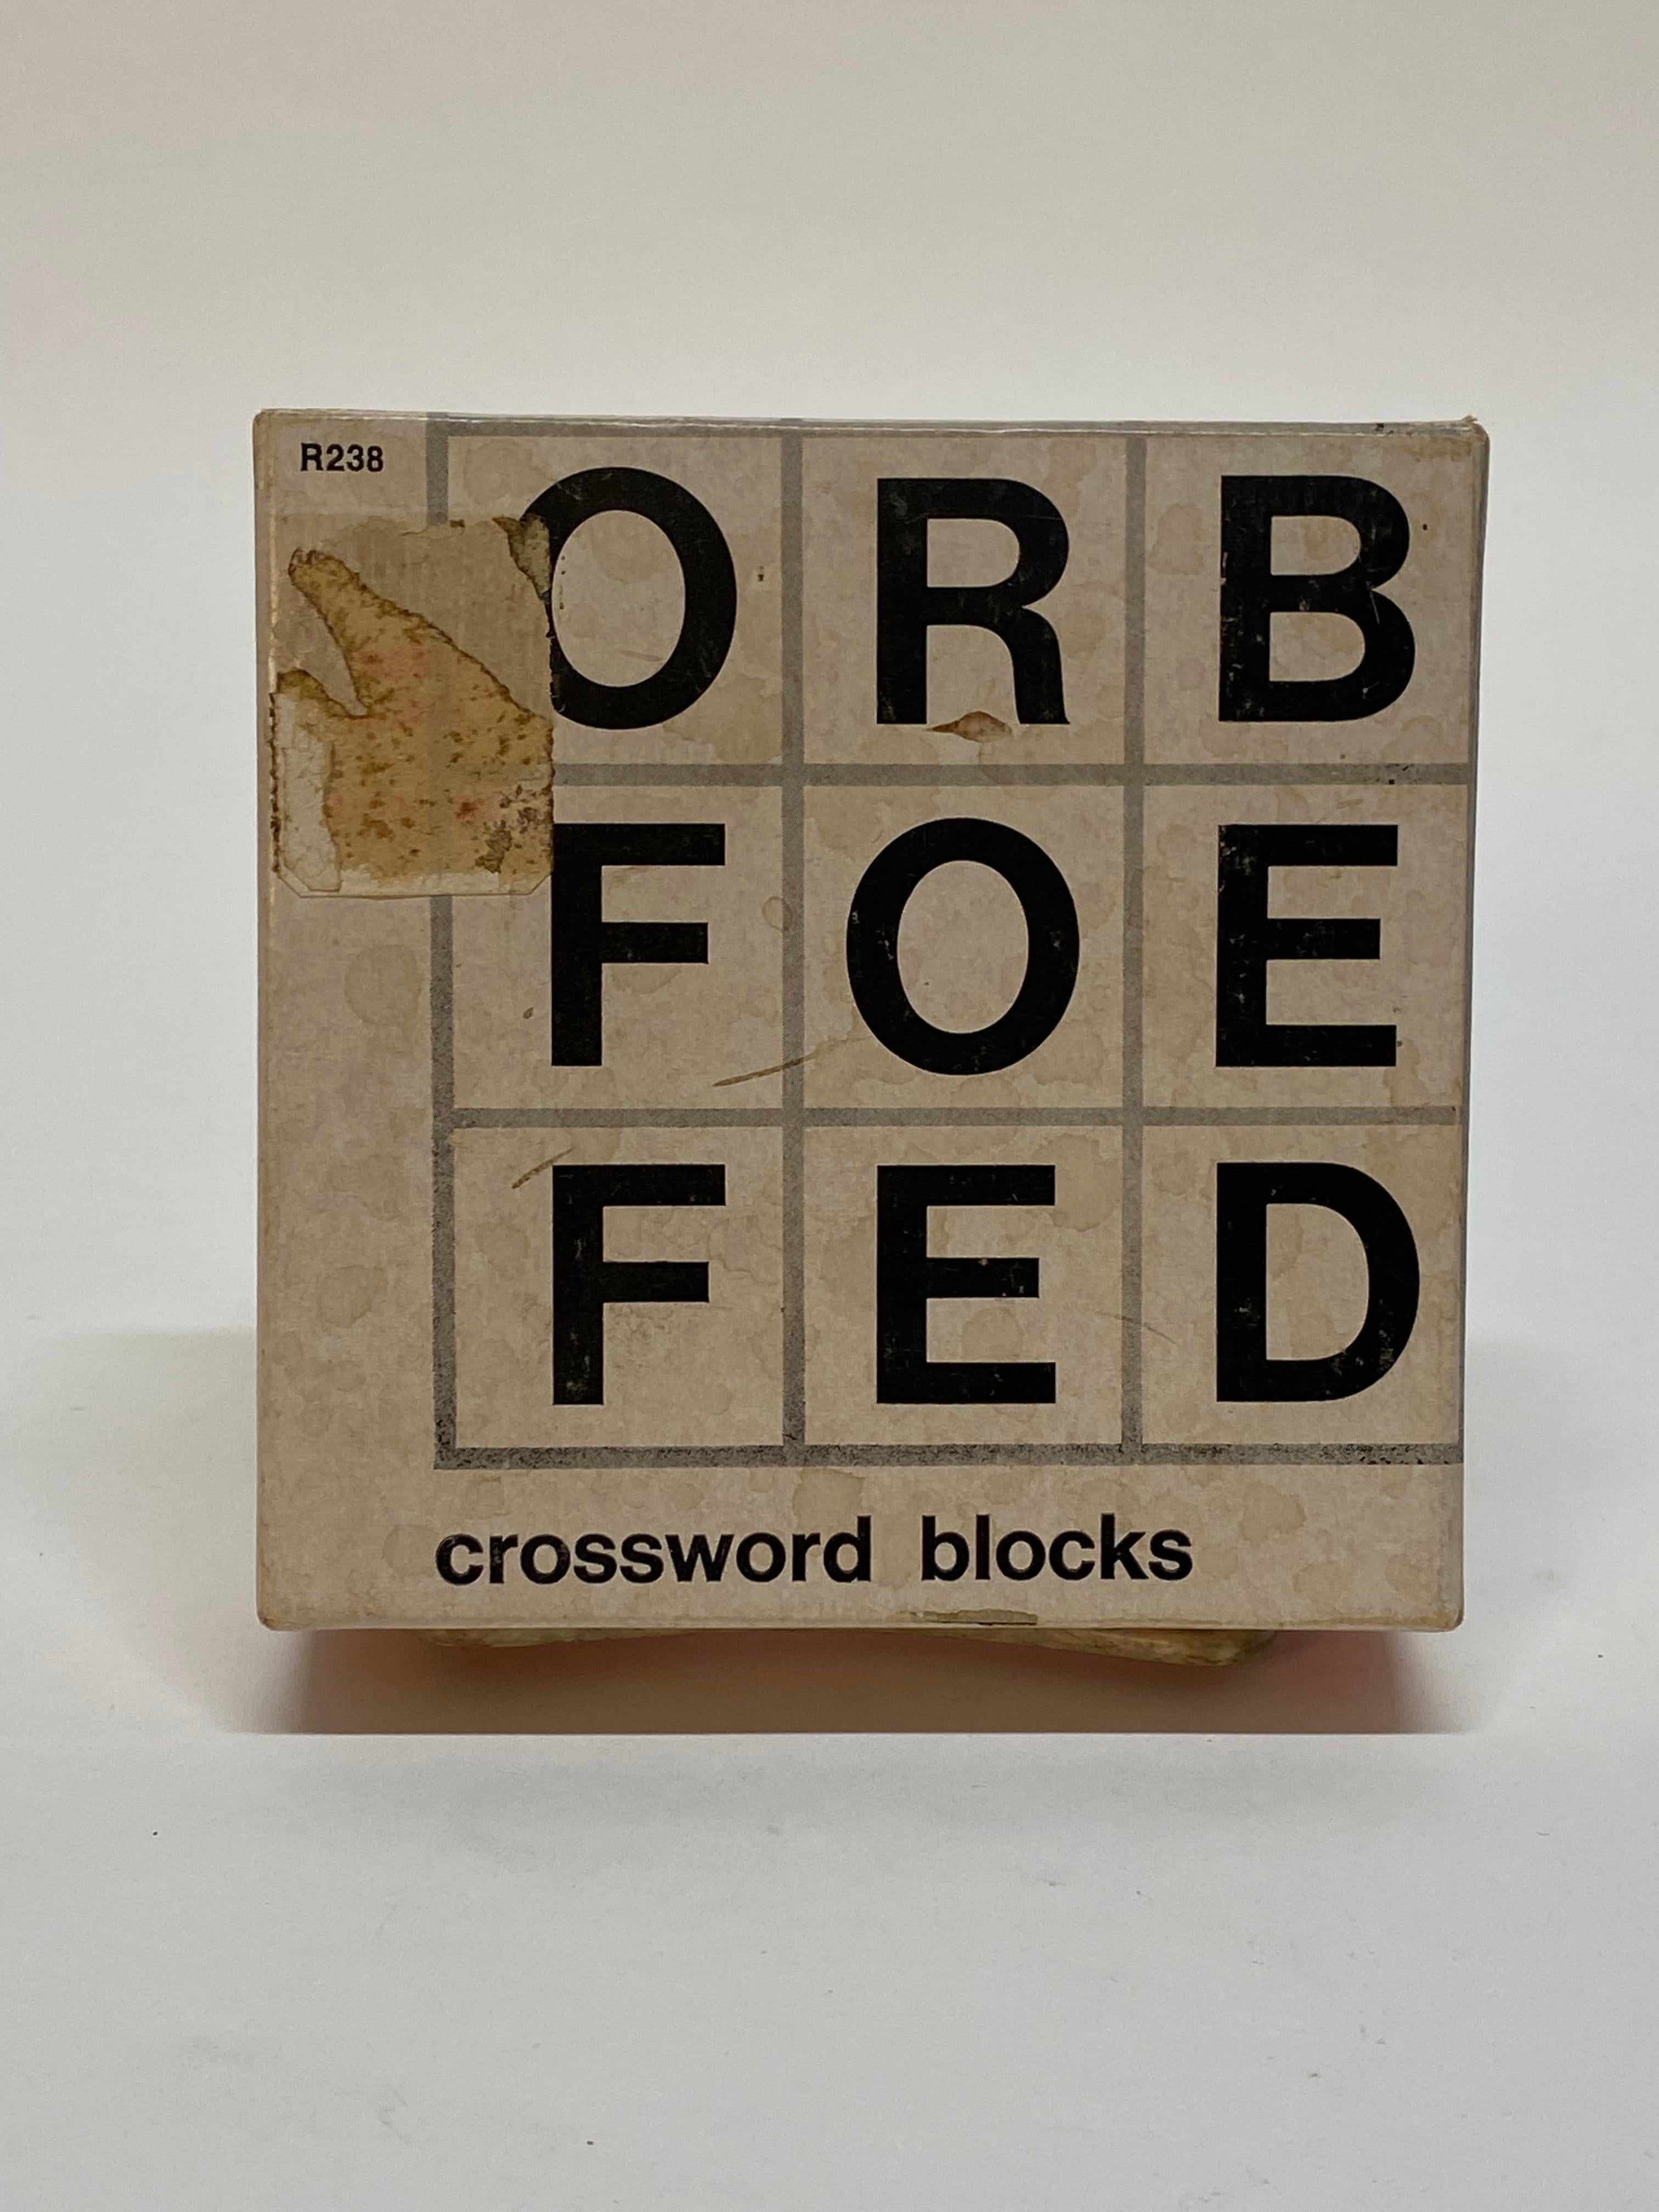 Wood crossword blocks puzzles by Creative Playthings, Princeton, New Jersey. Circa 1967. Instructions included. Solid wood cubes with vibrant orange lettering. Never mind the phone or the game console. Creative Playthings was intellectually a cut